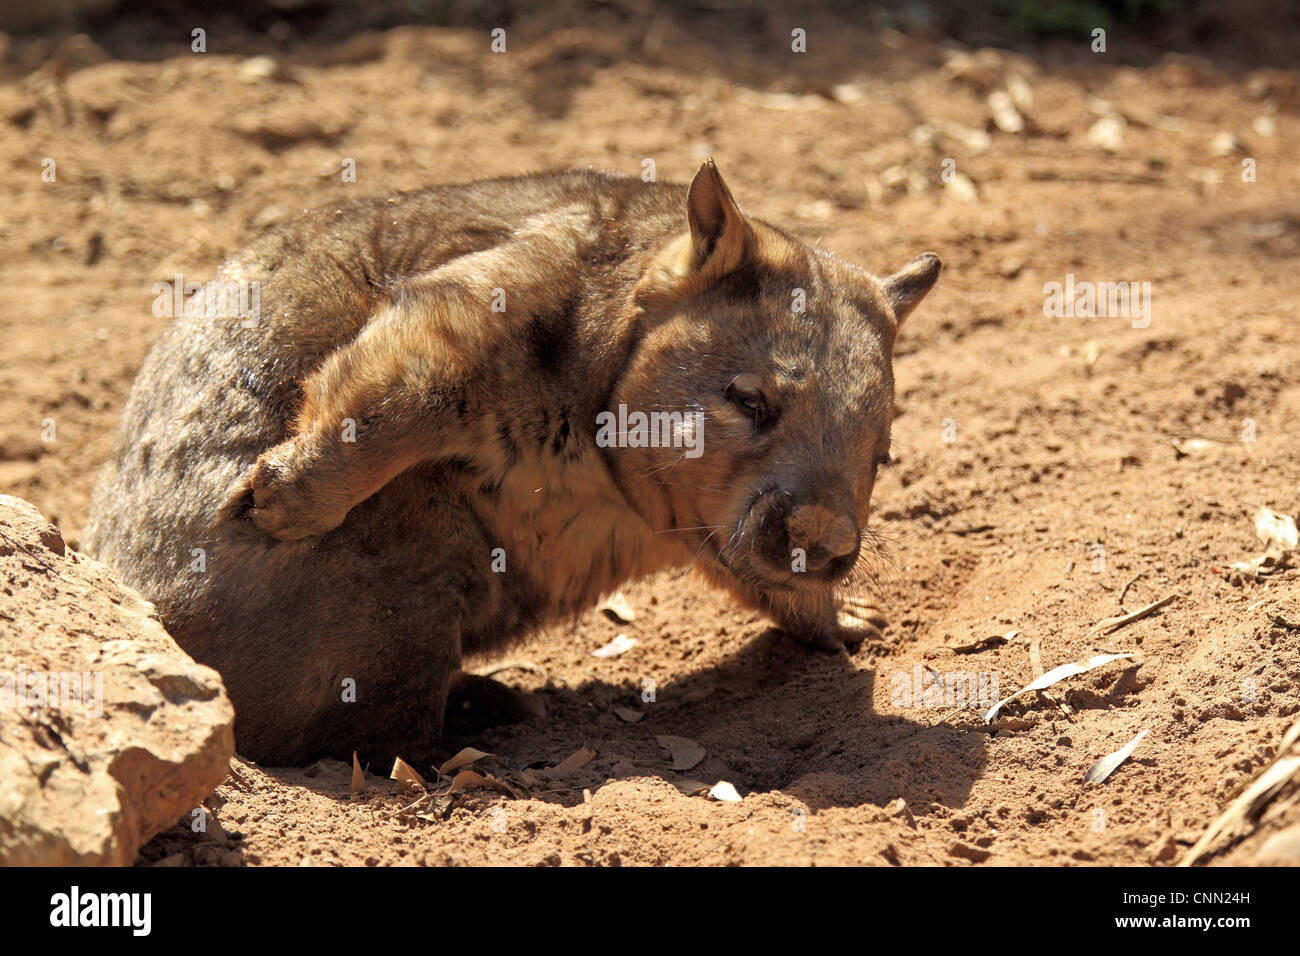 Southern Hairy Nosed Wombat Lasiorhinus Latifrons Adult Scratching South Australia 